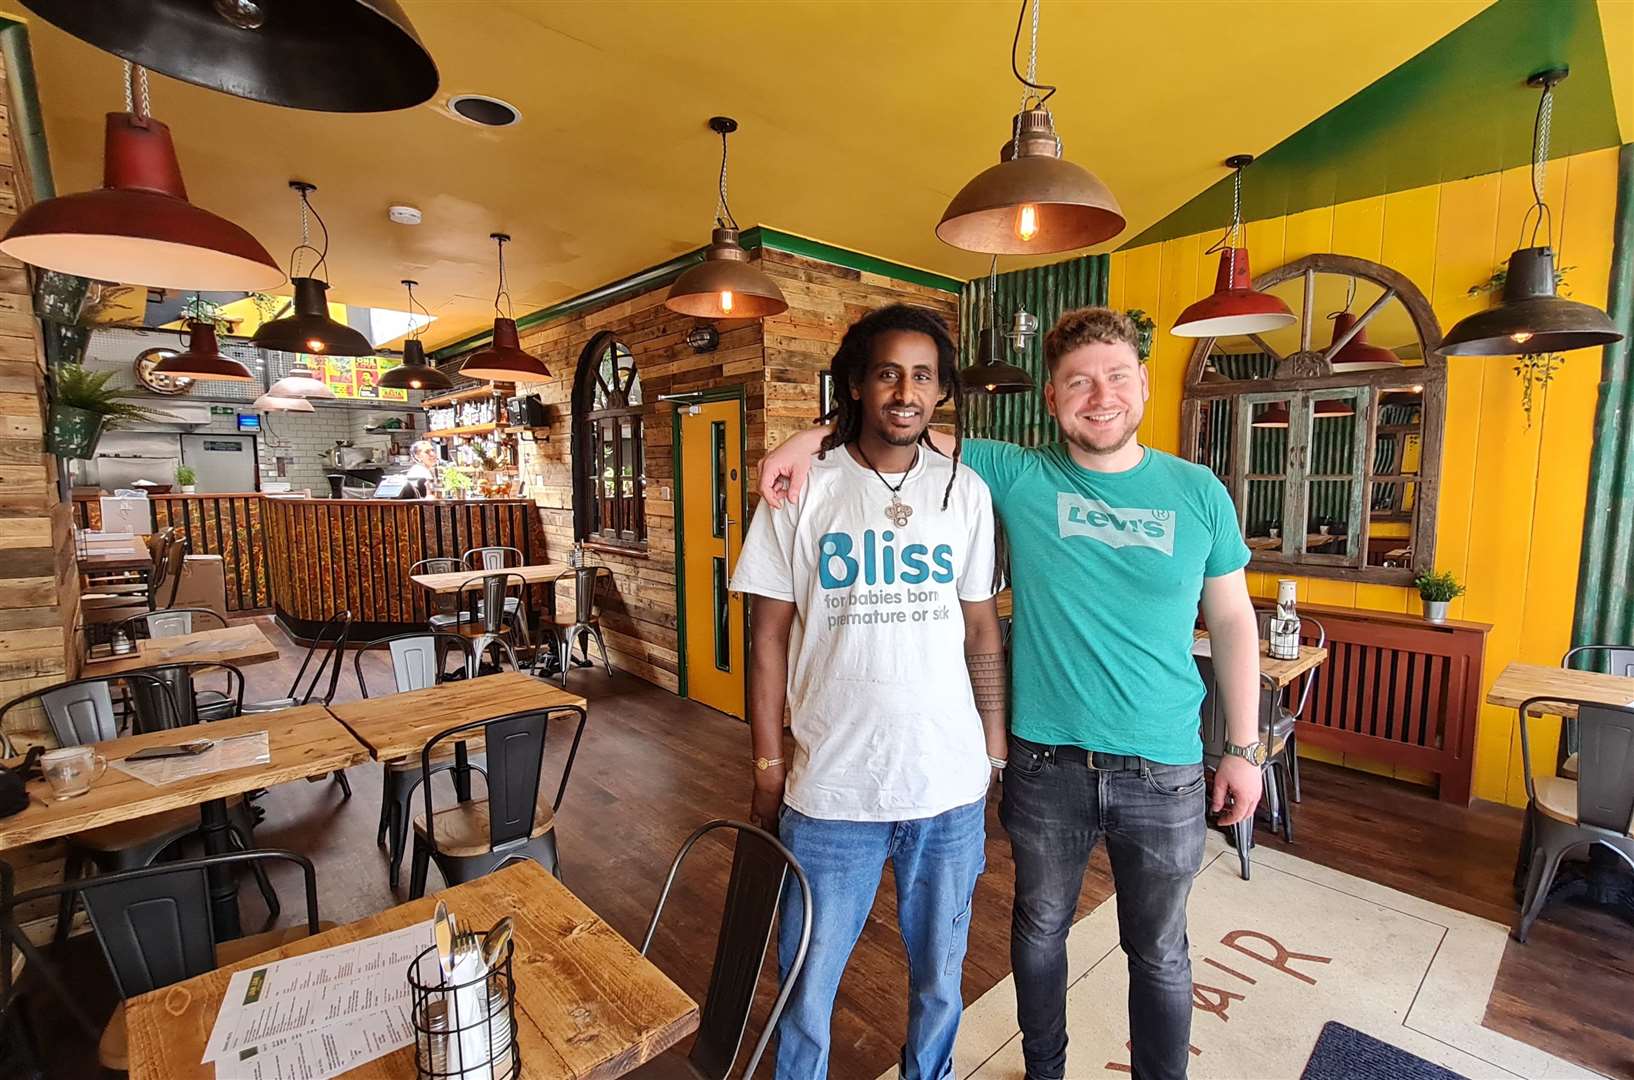 Jah Jah owners Thomas Sebhat and Alex Oprea at the new restaurant in Harbour Street, Ramsgate